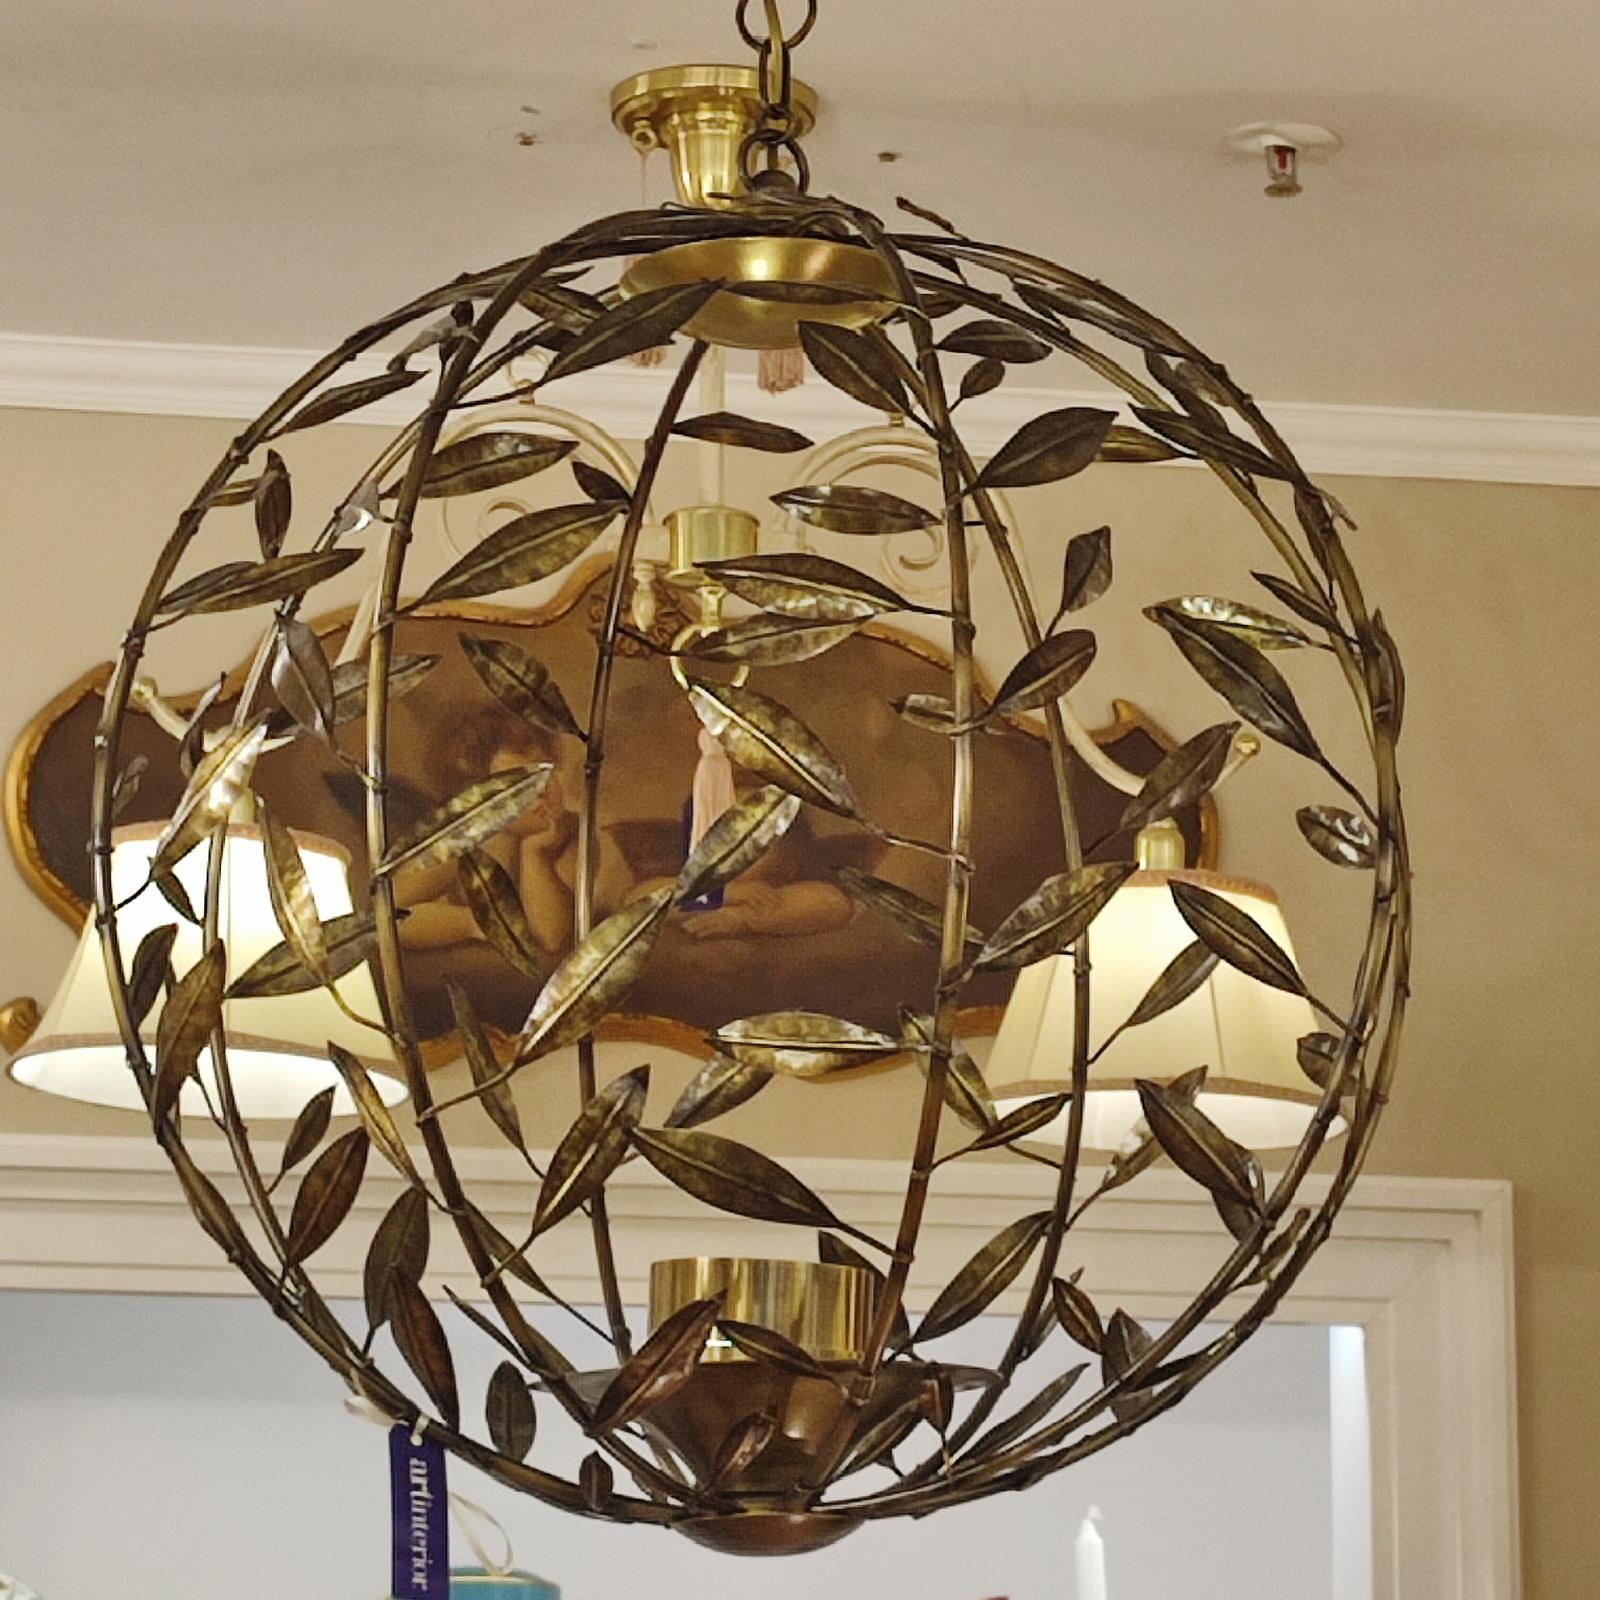 Foliage brass chandelier, spherical shape, the meridians decorated with leaves, Standard delivery with 8 lights. Available in several finishes. Check the color table. Other customized finishes might be available upon request.
Dimensions: diameter